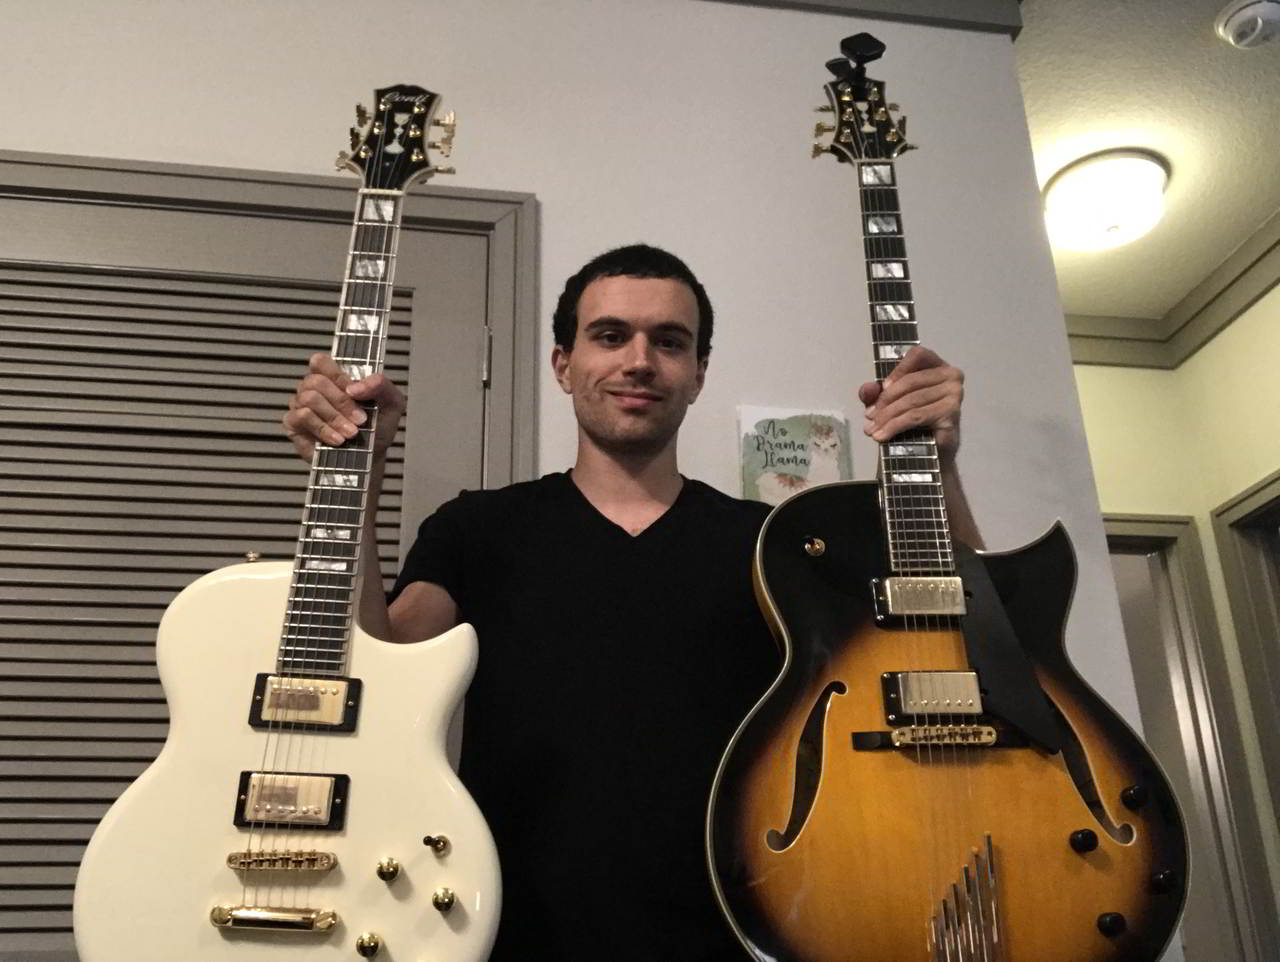 Joseph Ahmad standing proud with a Conti Solid Body and a Conti Heirloom archtop